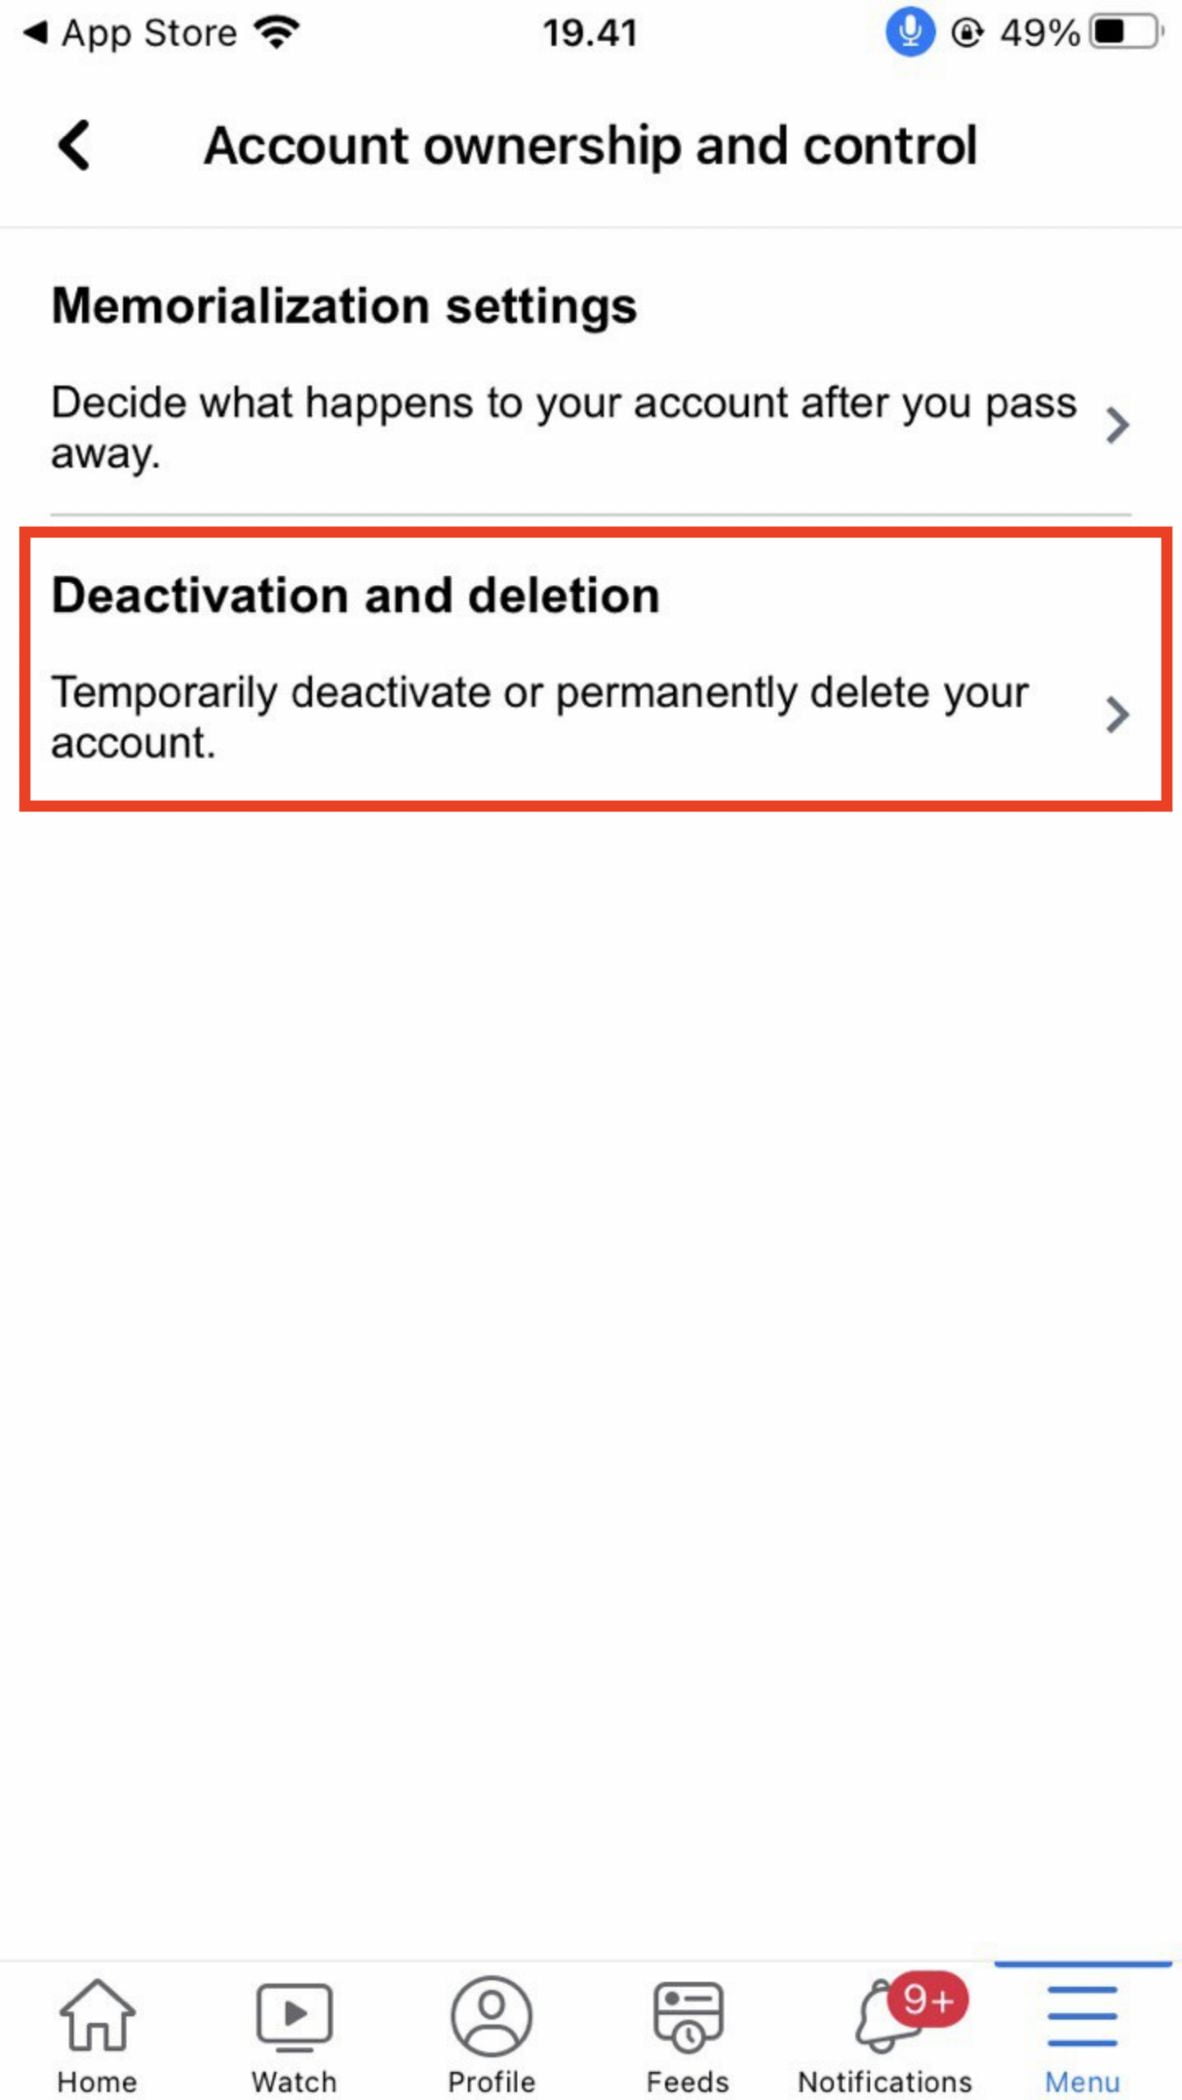 How to Deactivate Facebook Account using iPhone